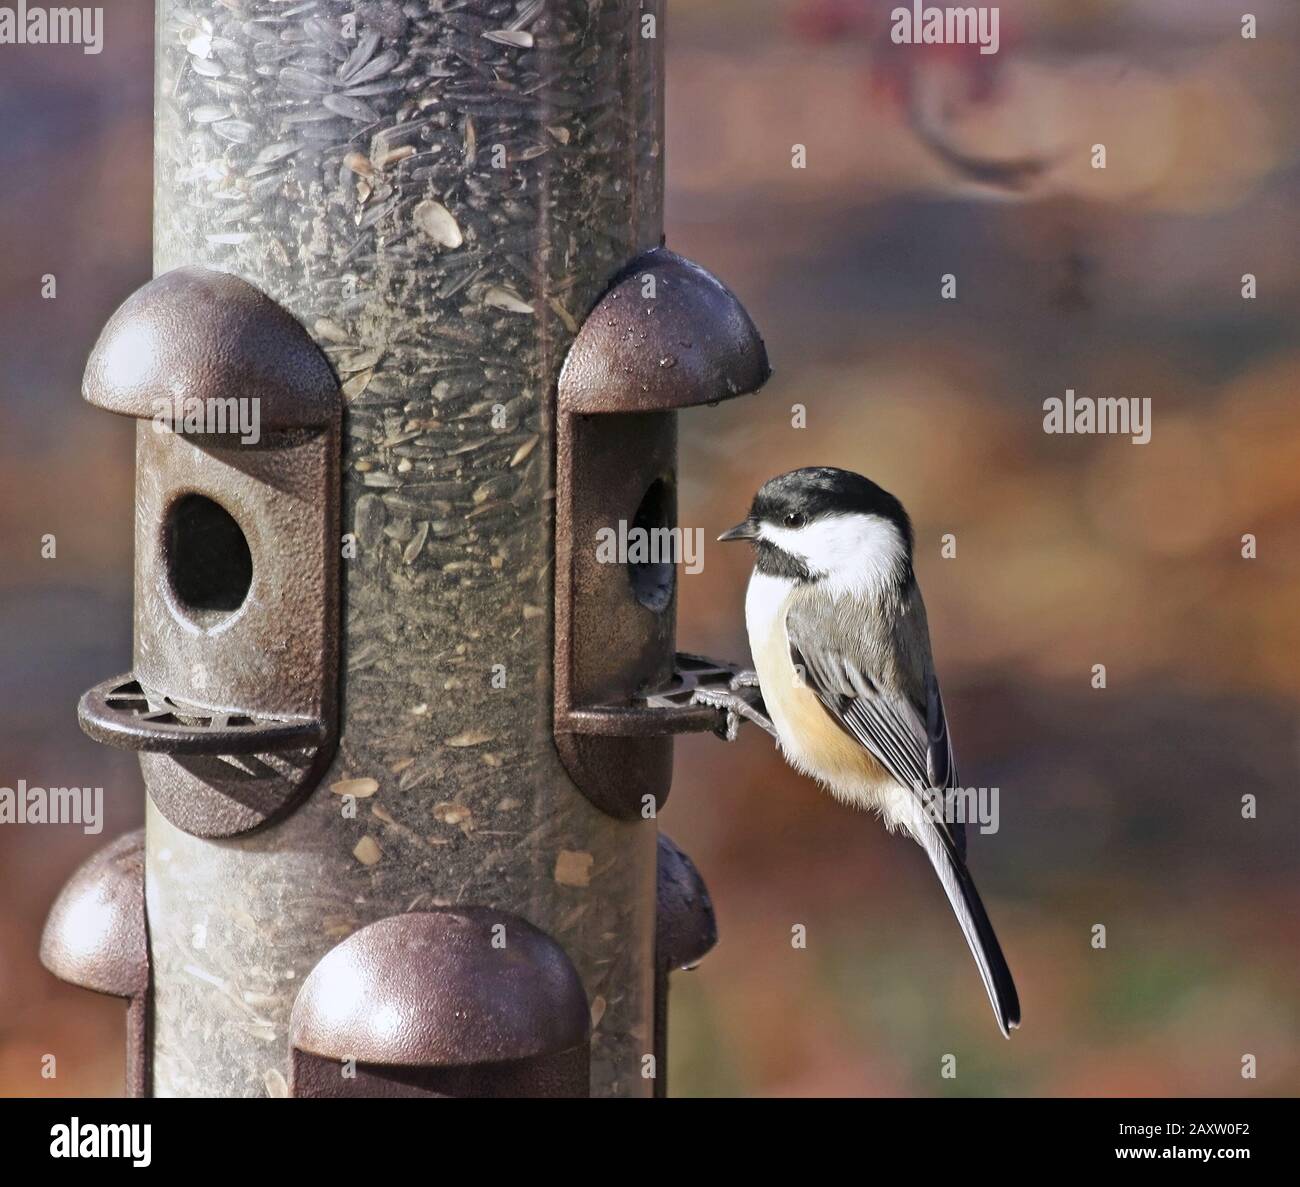 Black Capped Chickadee perched on an outdoor feeder Stock Photo